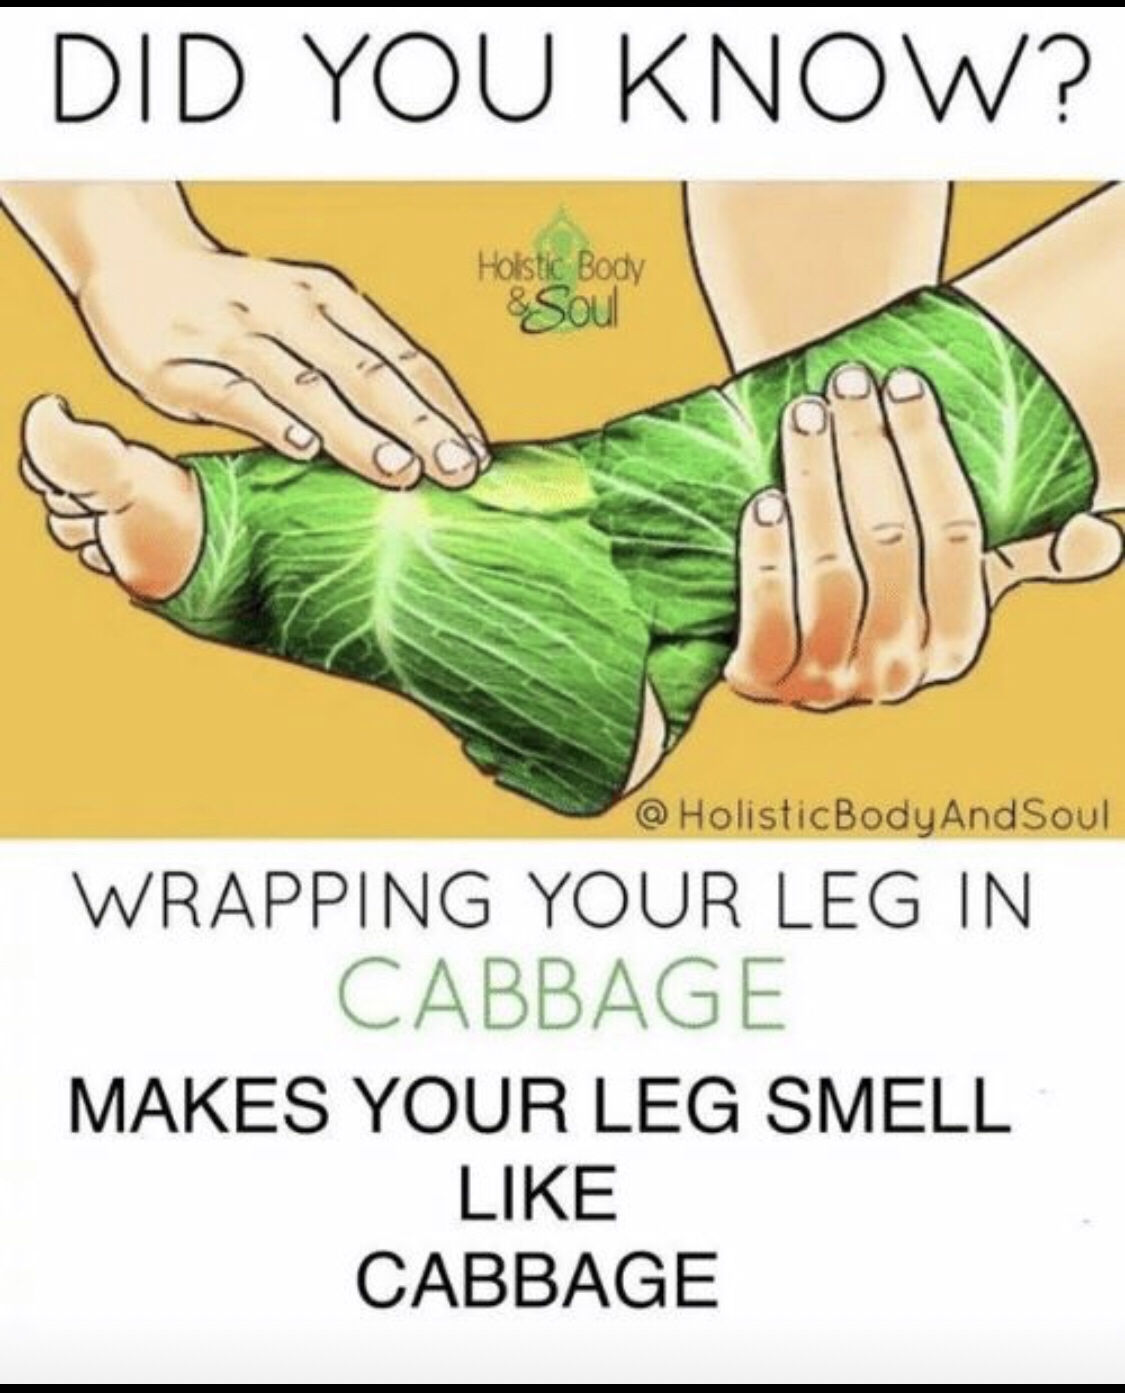 cabbage meme - Did You Know? Hoistic Body & Soul HolisticBody And Soul Wrapping Your Leg In. Cabbage Makes Your Leg Smell Cabbage